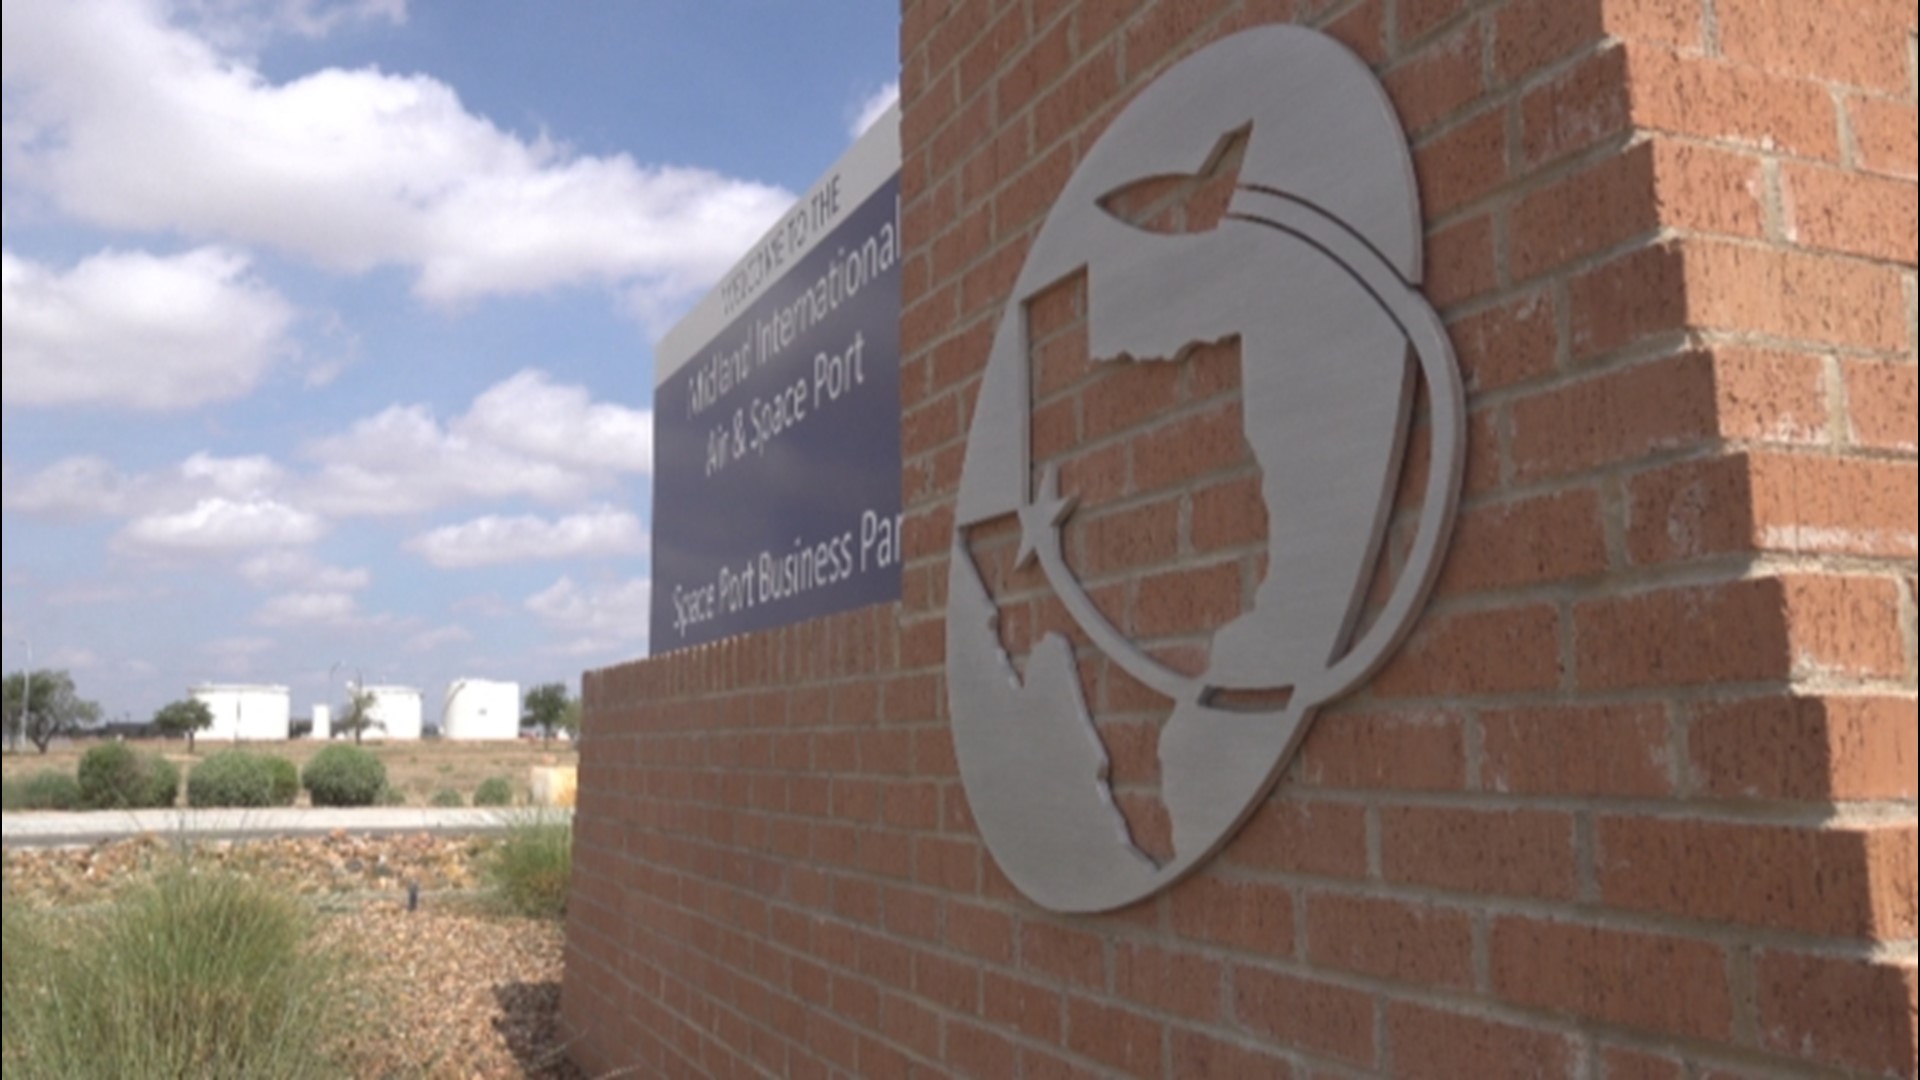 Midland plans to re-introduce the Midland Spaceport Development Board as a result of the new legislation.